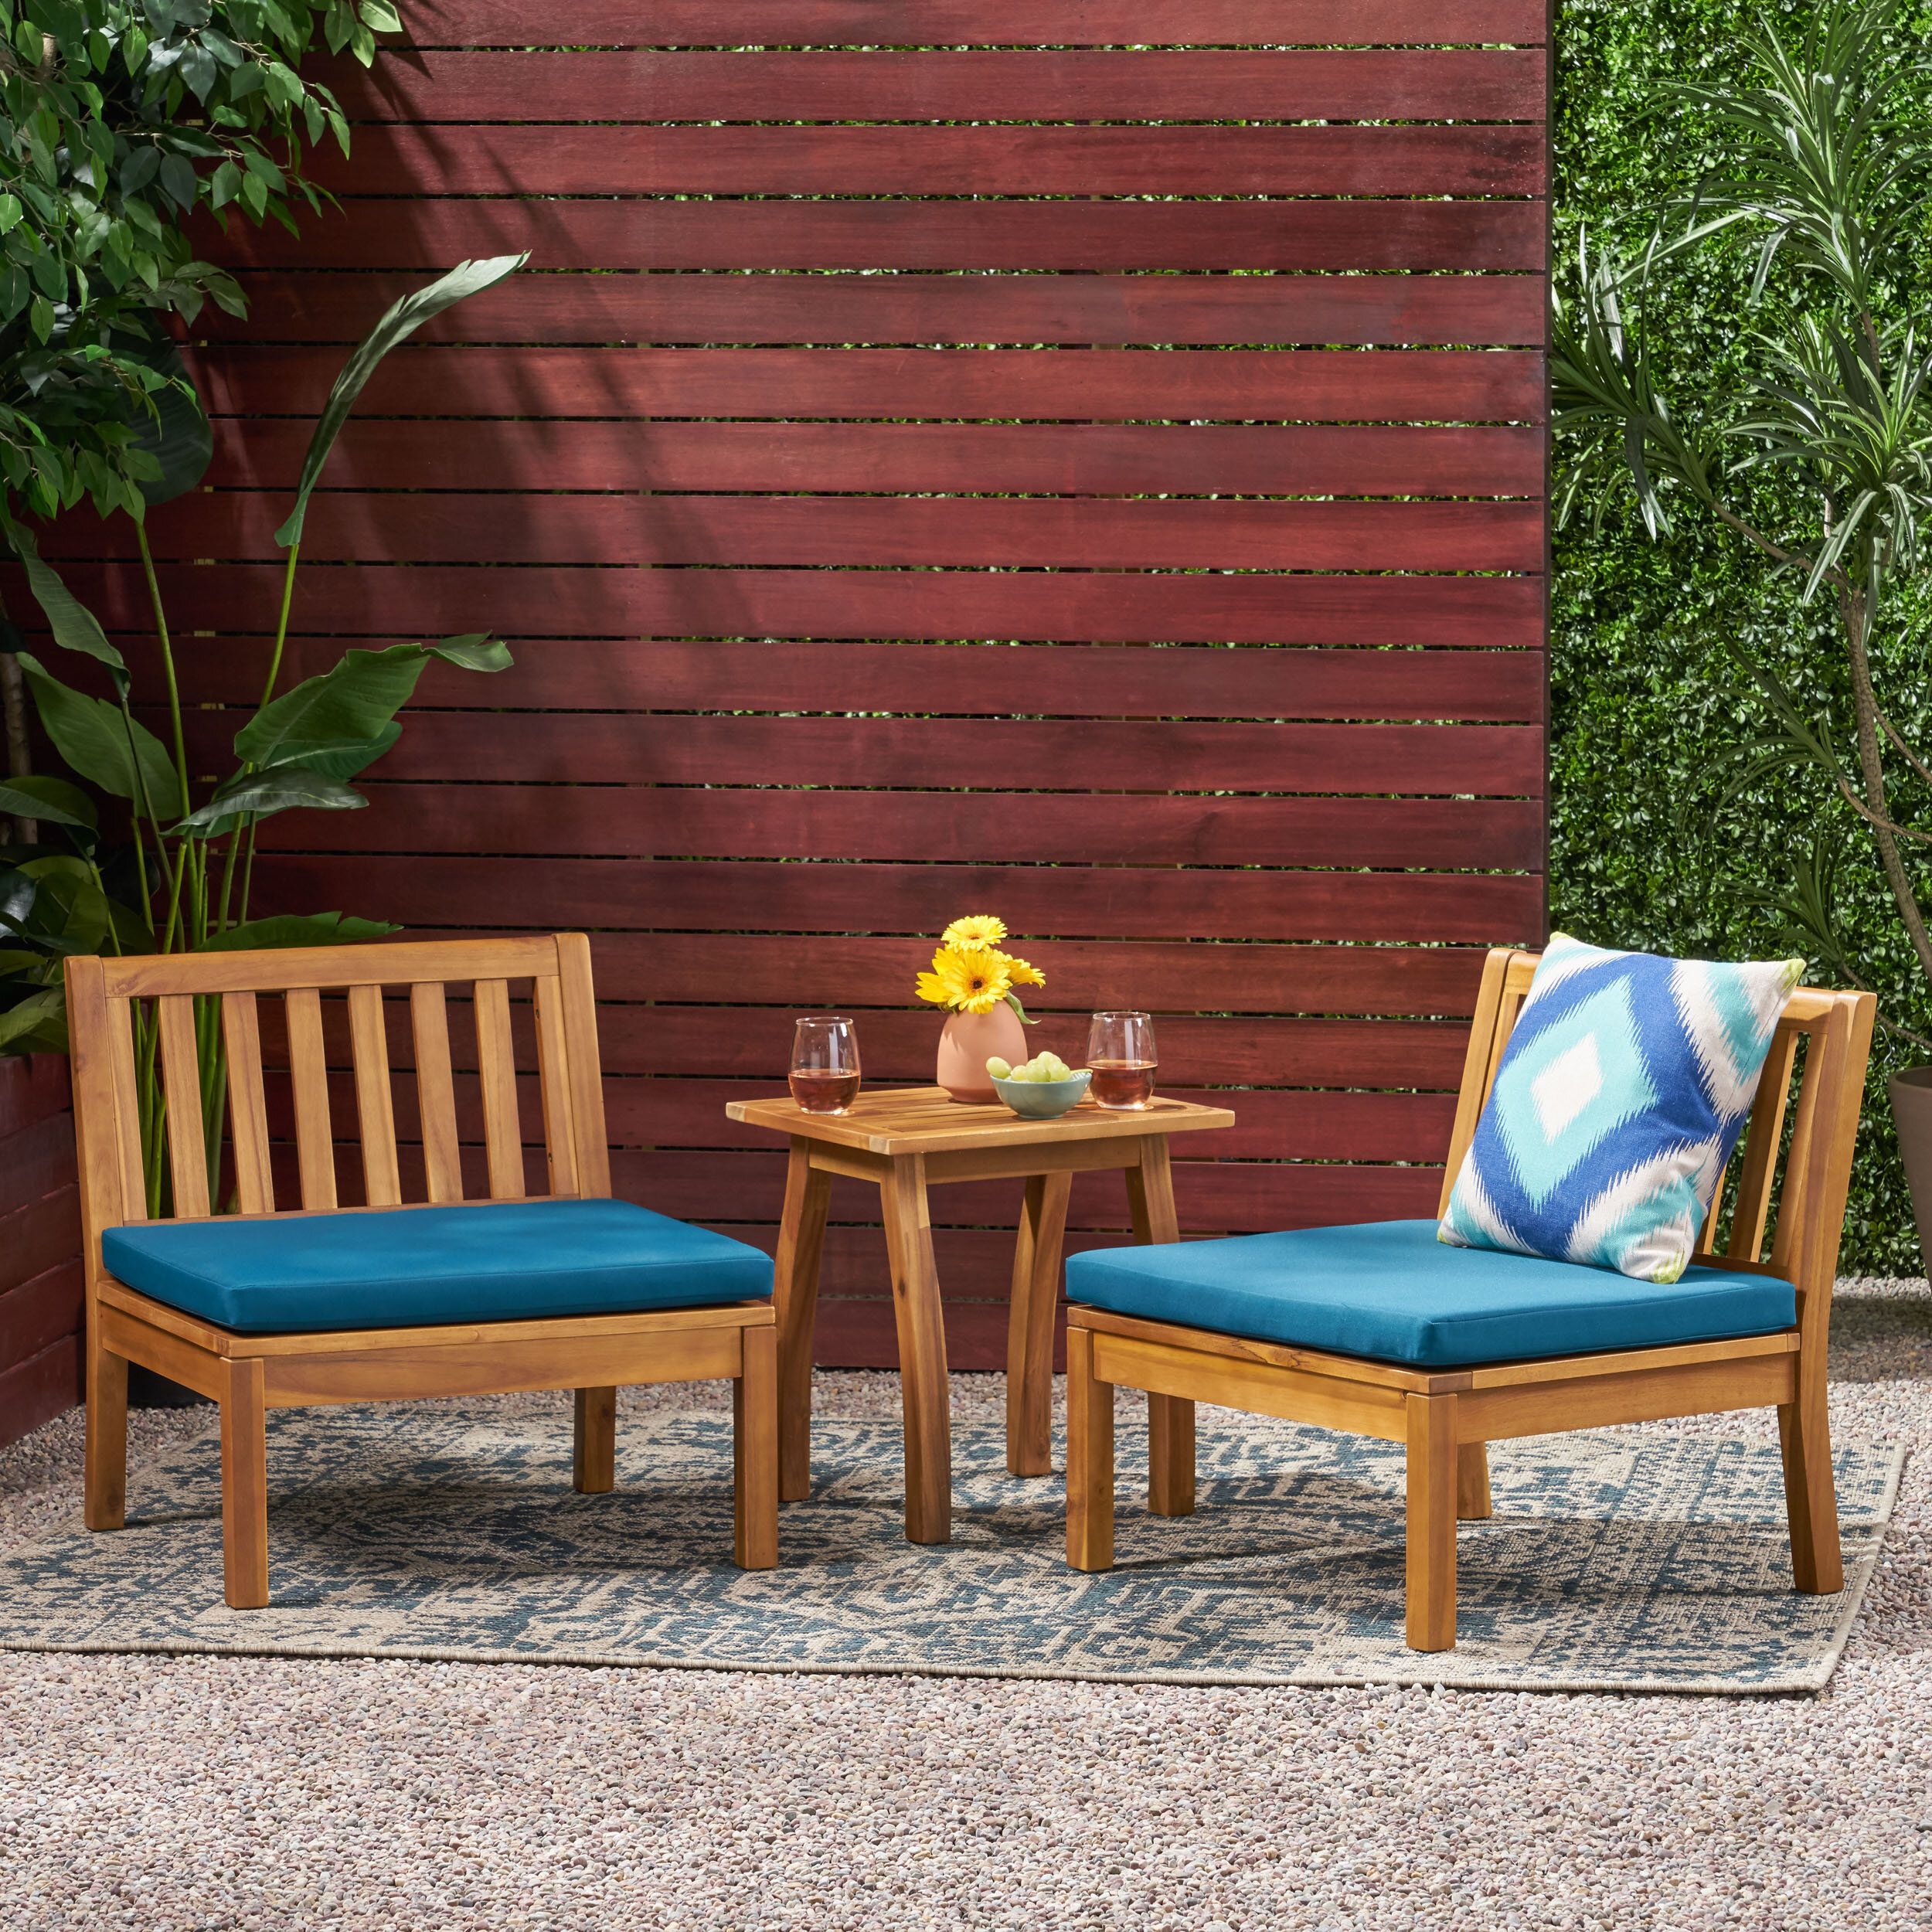 Hiltz Outdoor Chat 3 Piece Seating Group With Cushions Intended For Hiltz Armchairs (View 9 of 15)